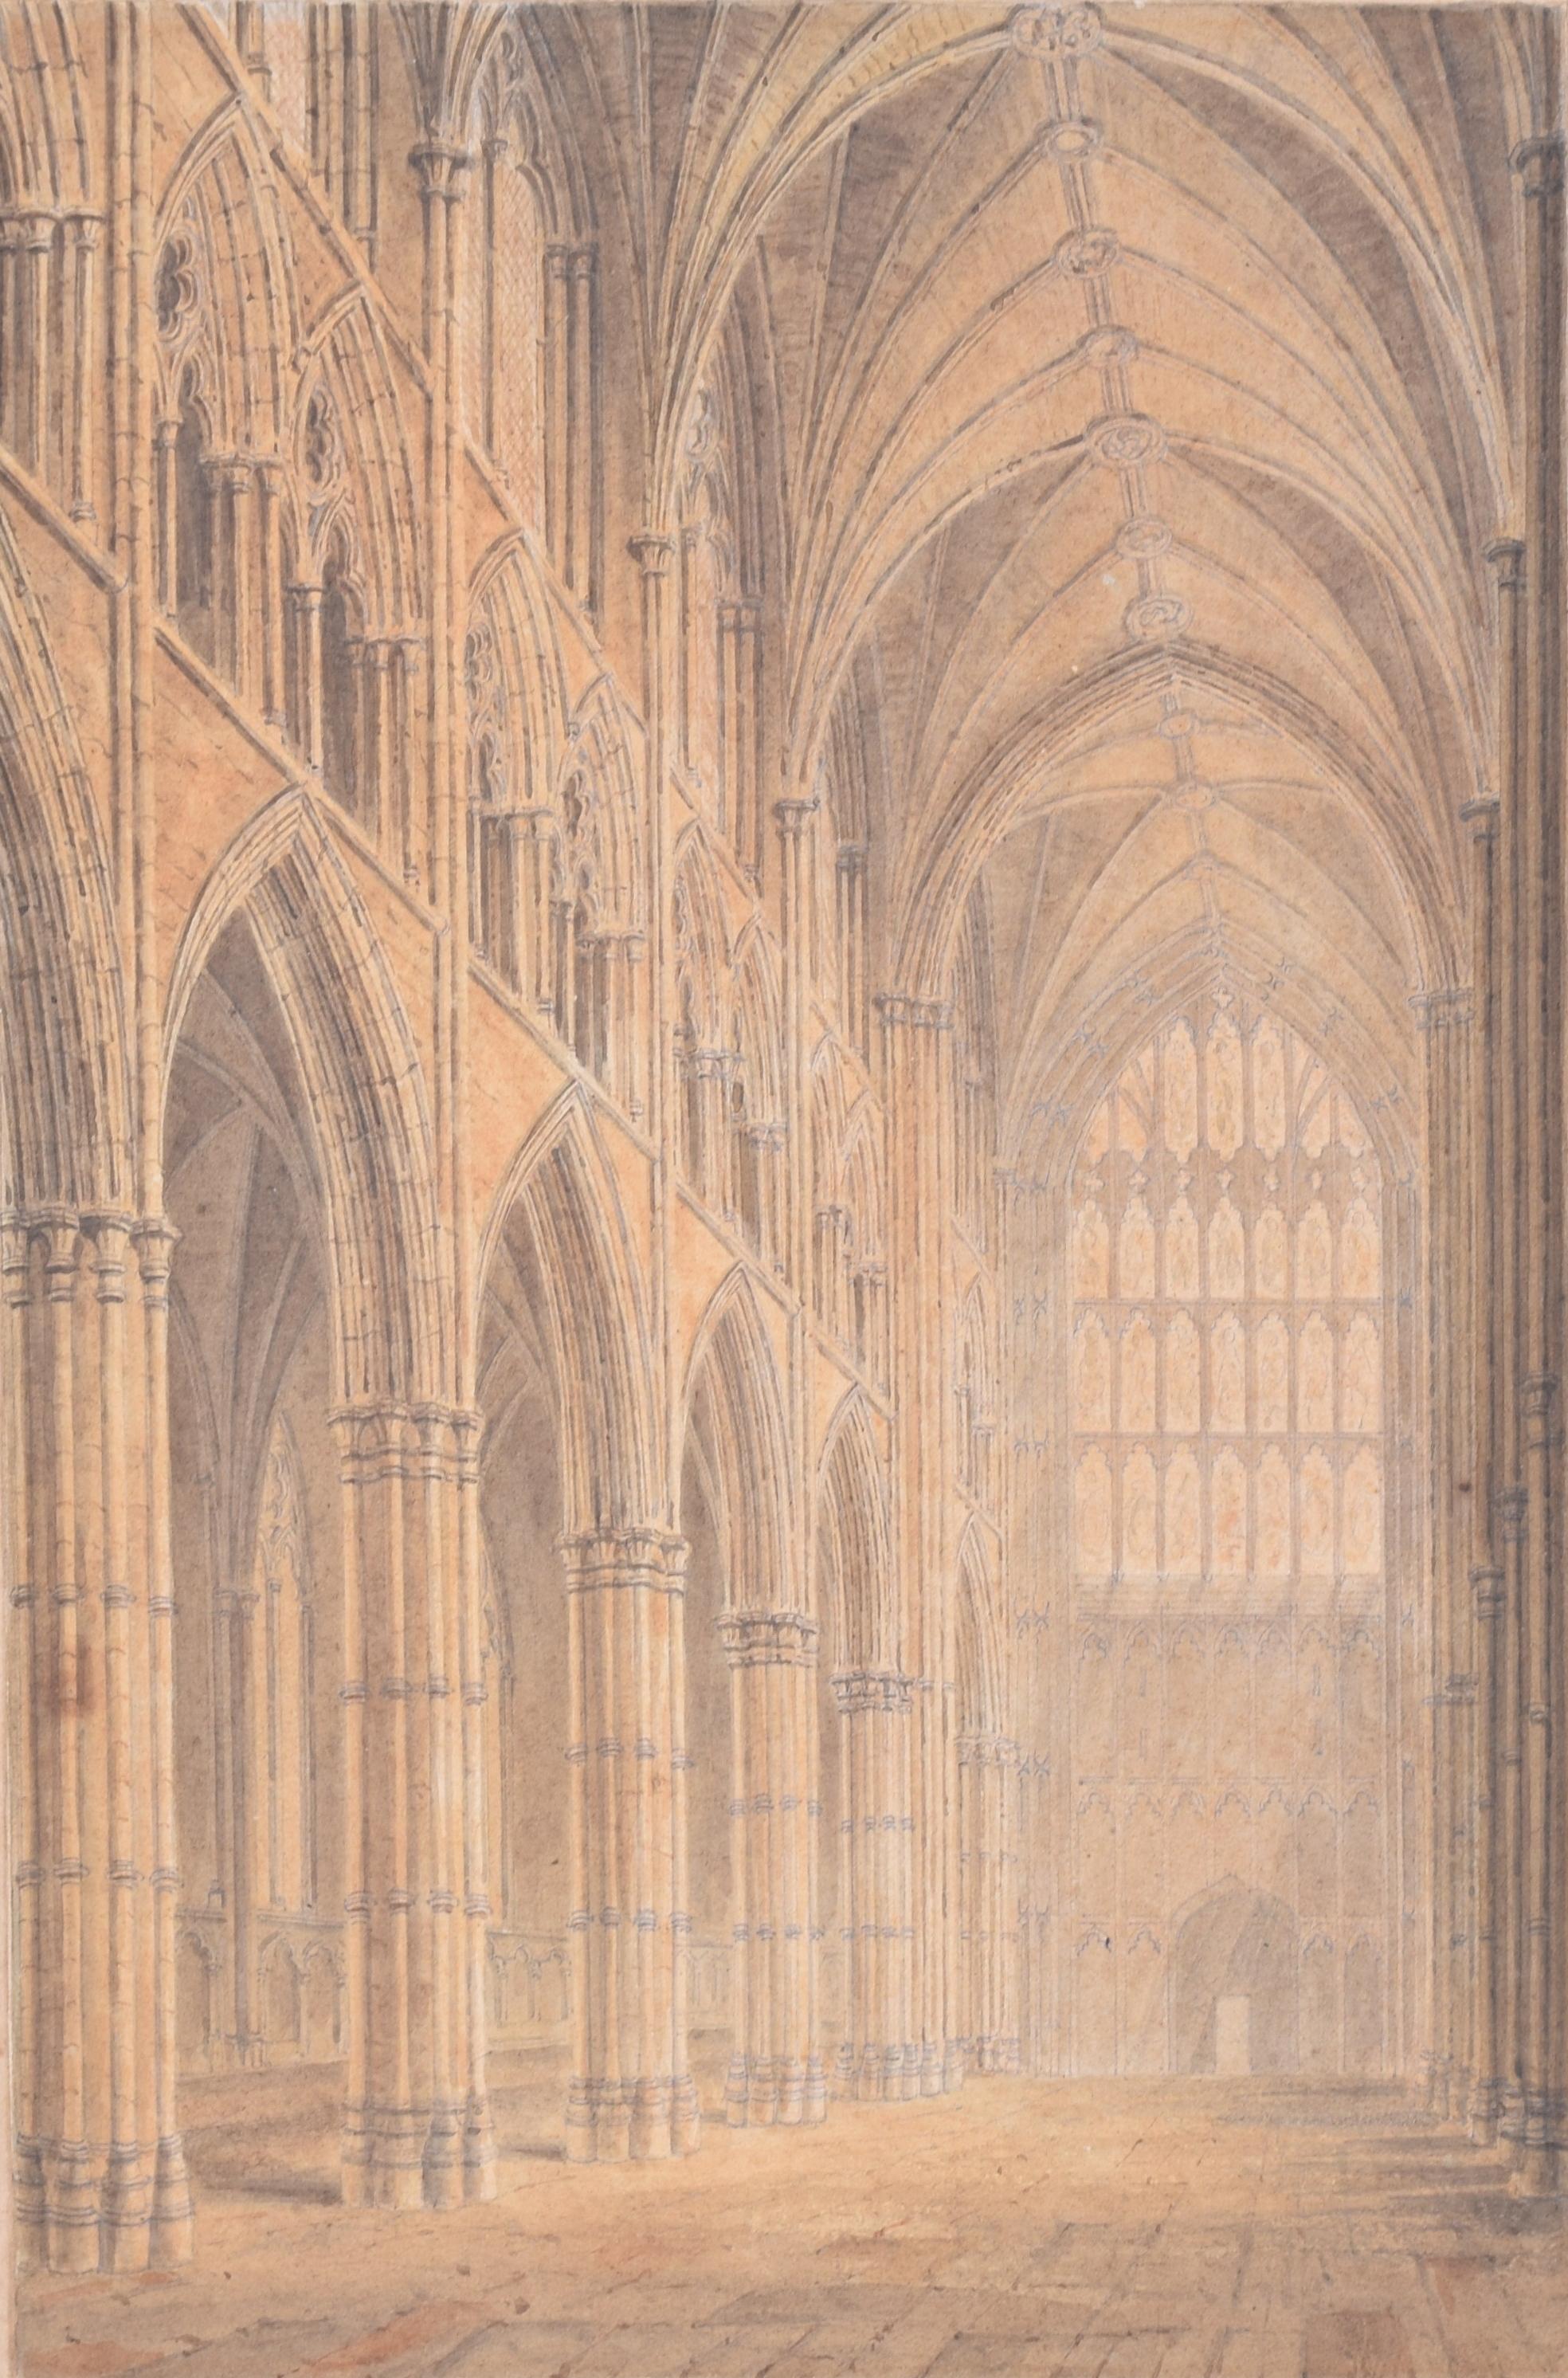 John Chessel Buckler (1793 - 1894)
The Nave of Westminster Abbey
Watercolour
25 x 17 cm

Signed, titled and dated 1810.

John Chessell Buckler was a British architect, the eldest son of the architect John Buckler. His work included restorations of